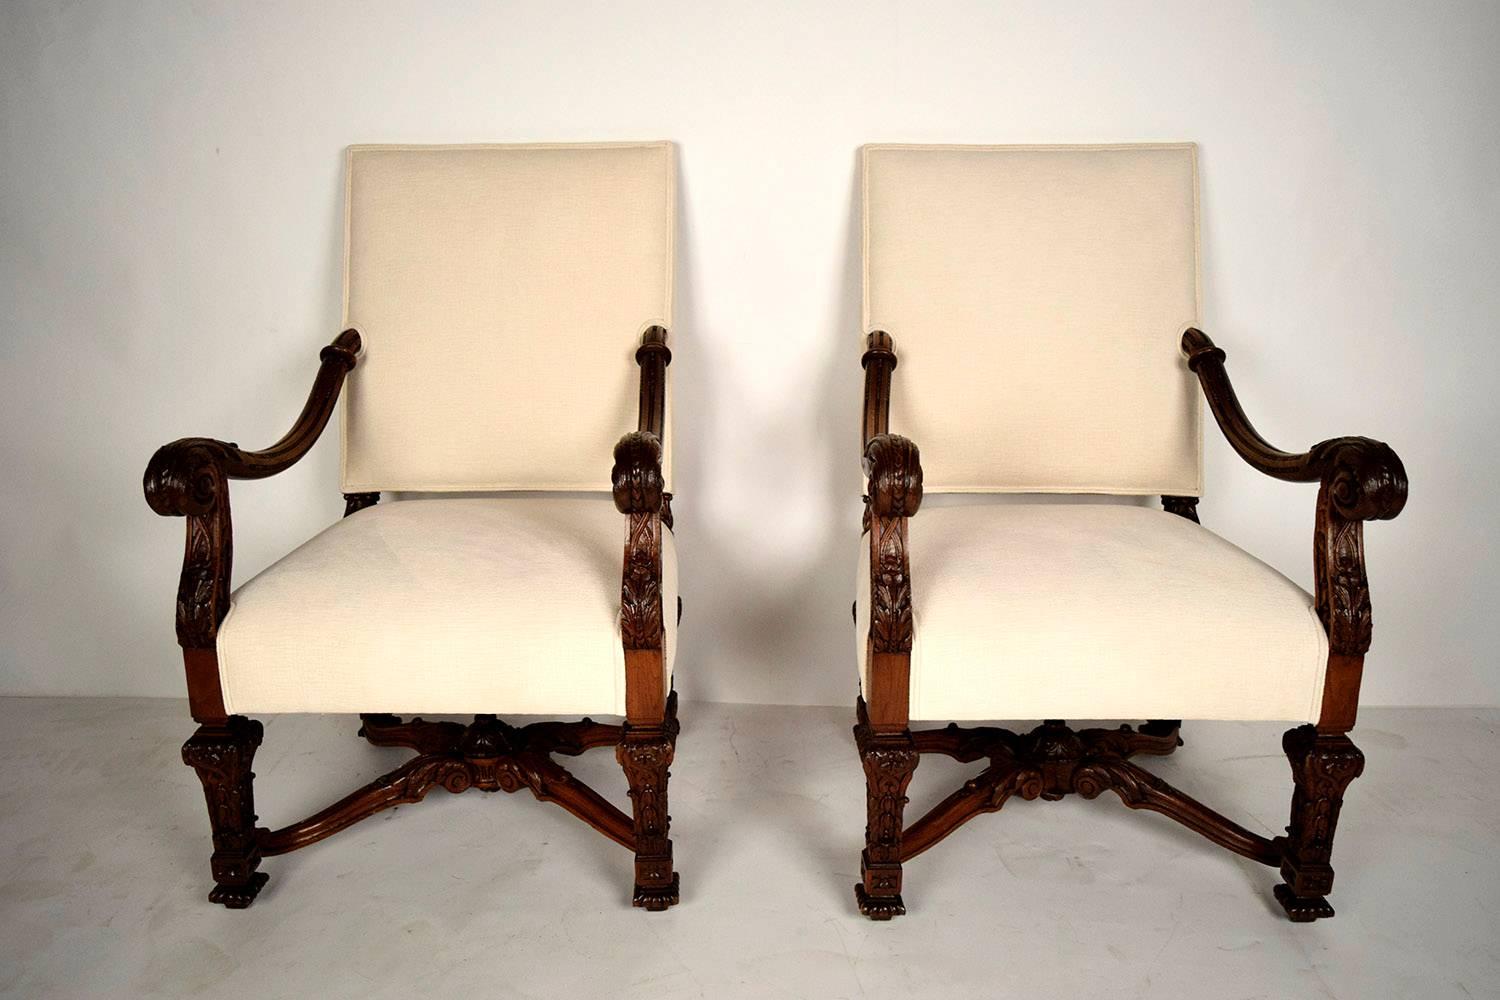 This pair of 1880s French Louis XIV-style bergeres features frames made from hand-carved solid oakwood with its original dark oak finish and stunning patina. On the arms of the chairs there are carved acanthus leaves culminating in a scroll handle.